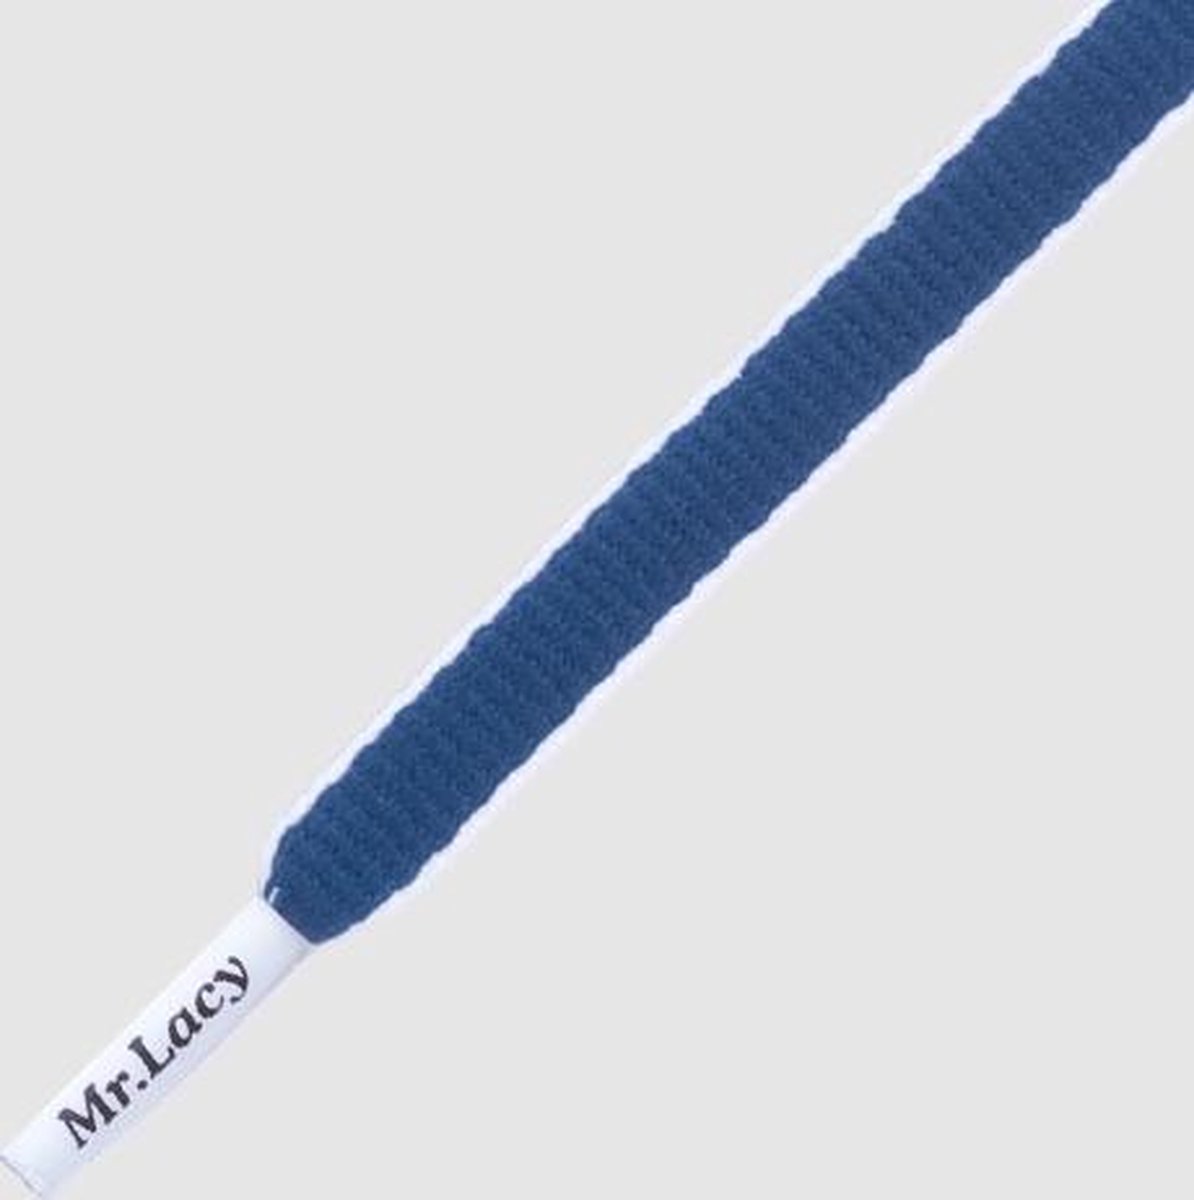 8 mm x 130 cm Ovaal Navy Wit - Slimmies Two Tone Mr.Lacy veters